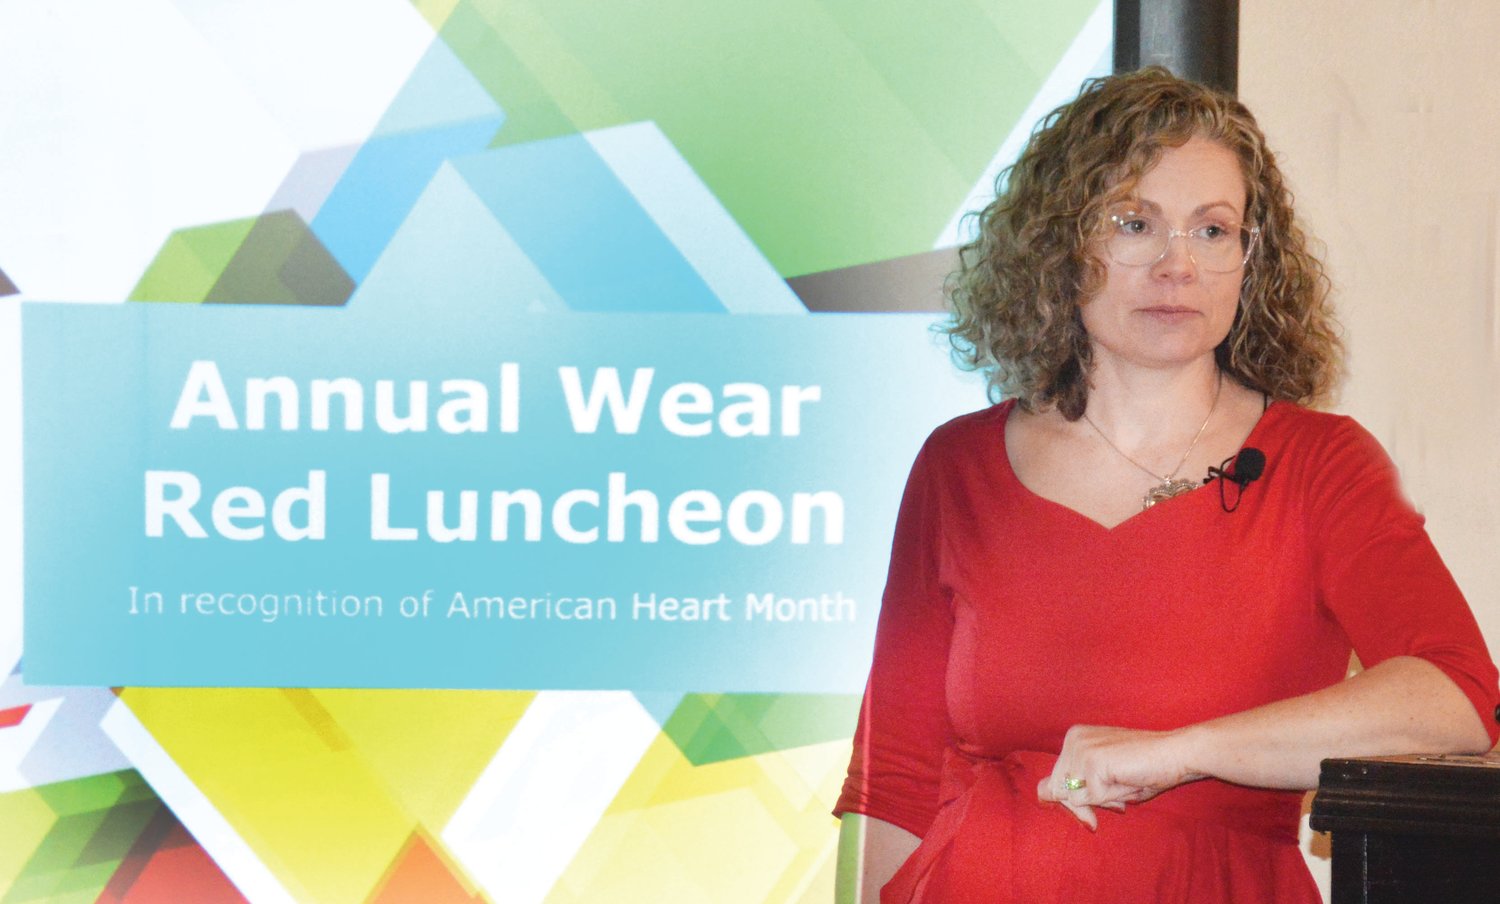 Linda Volstorf was the featured speaker at the Horizon Health Wear Red Luncheon promoting heart health for women.